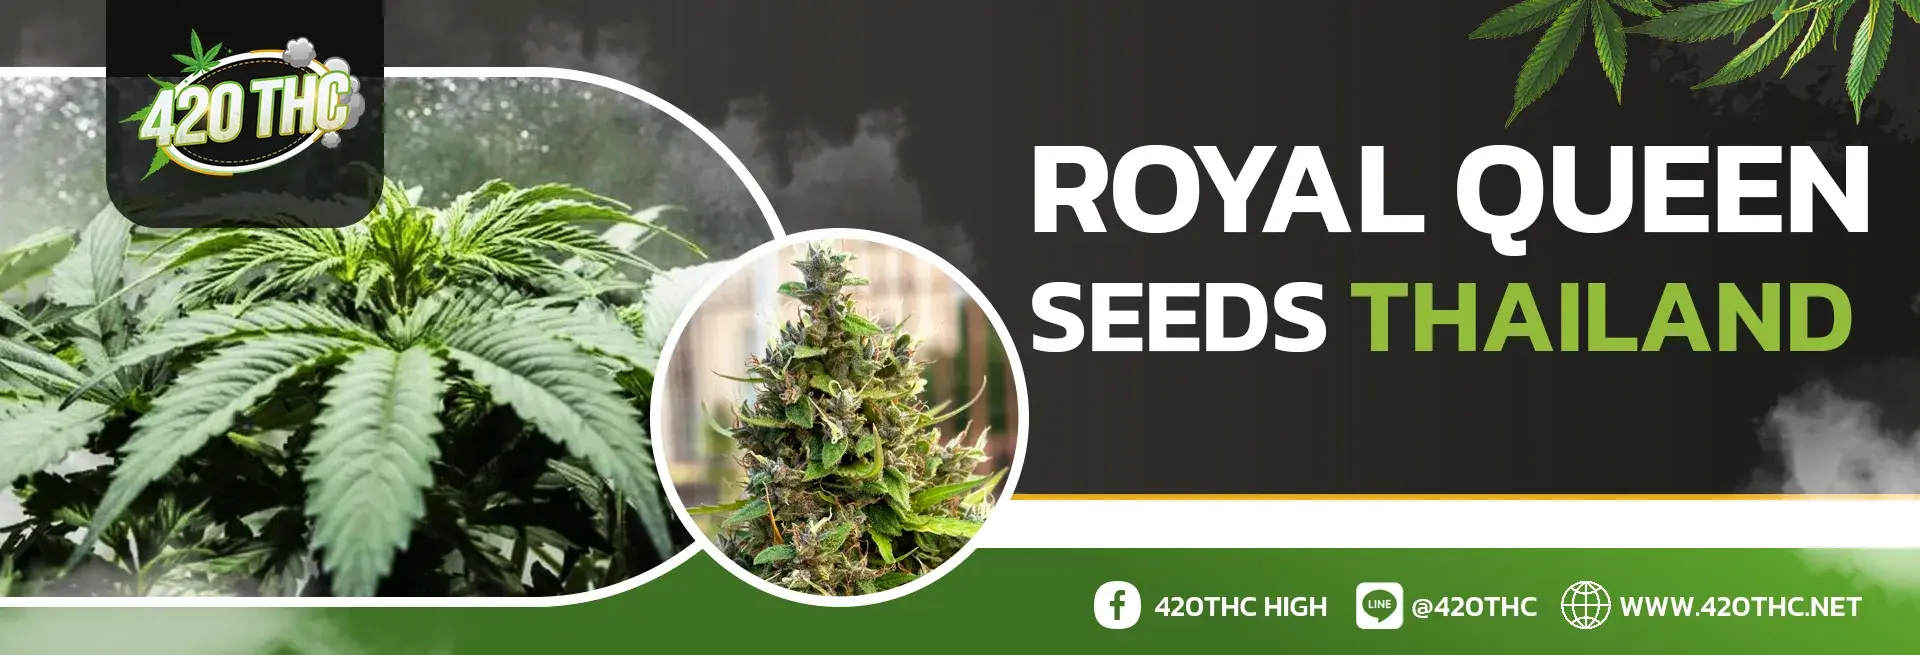 Royal Queen Seeds Thailand PC